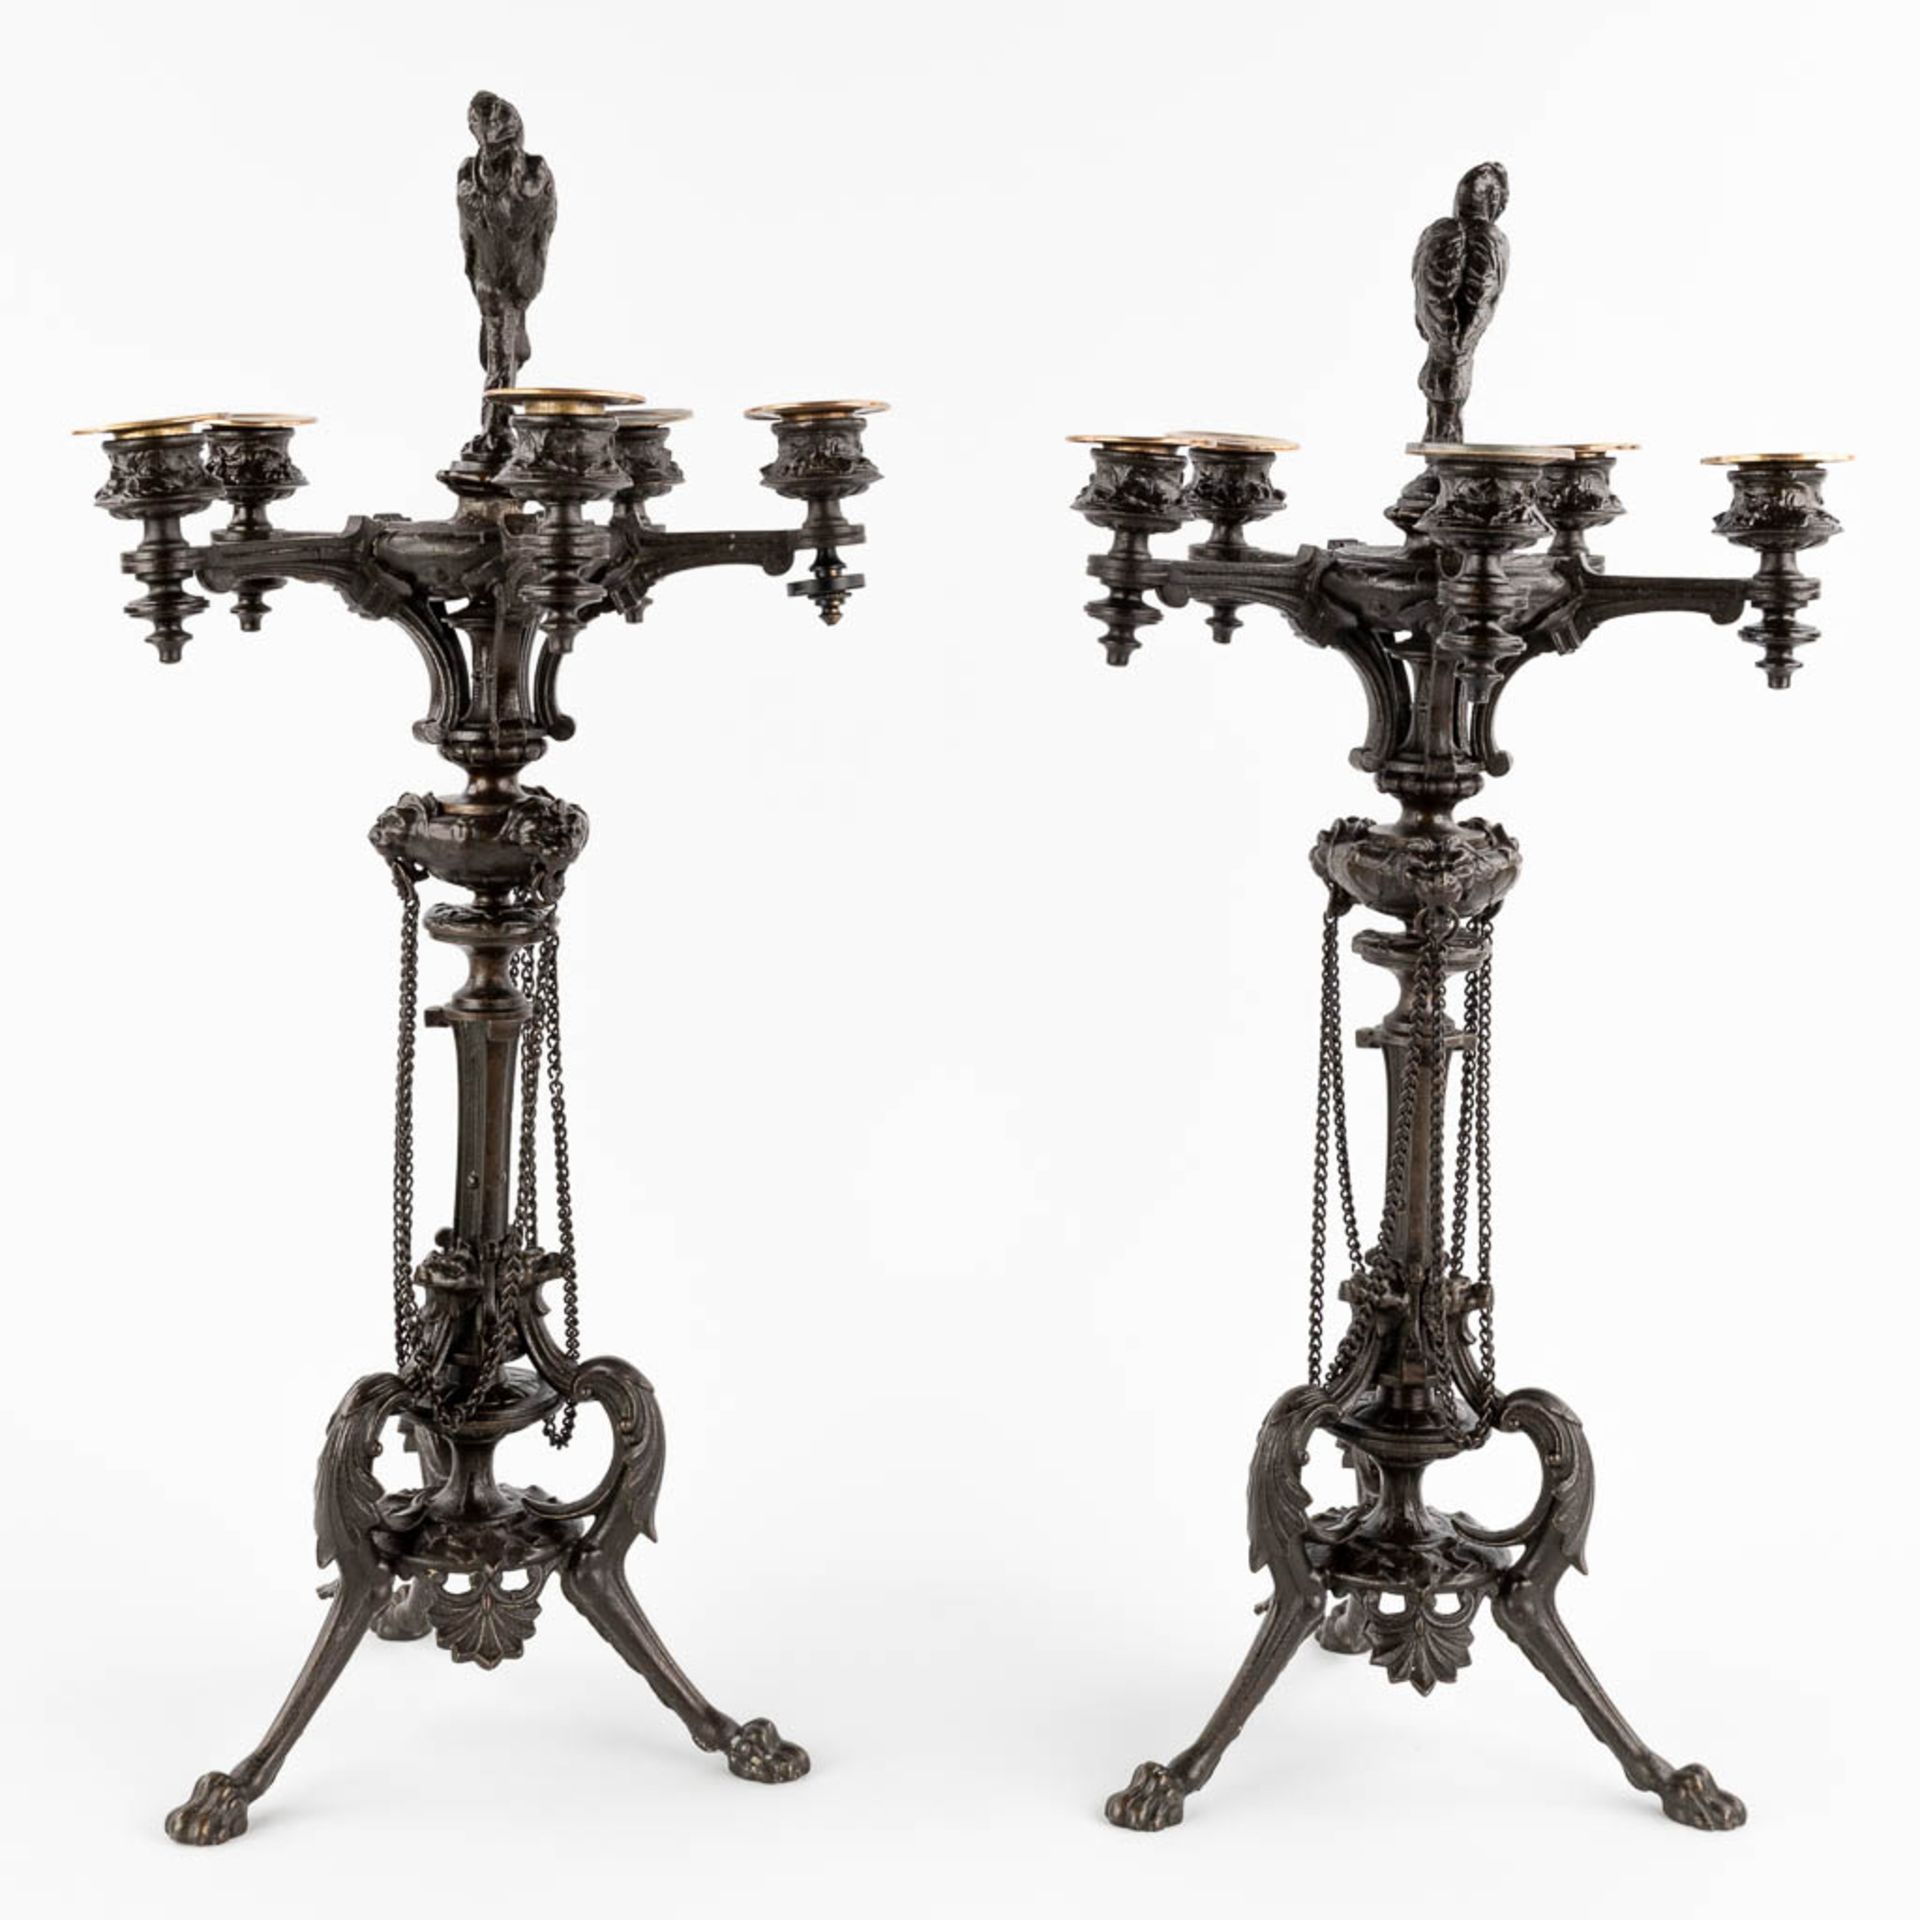 A pair of candelabra, bronze decorated with birds. 19th C. (H:56 x D:26 cm) - Image 5 of 12